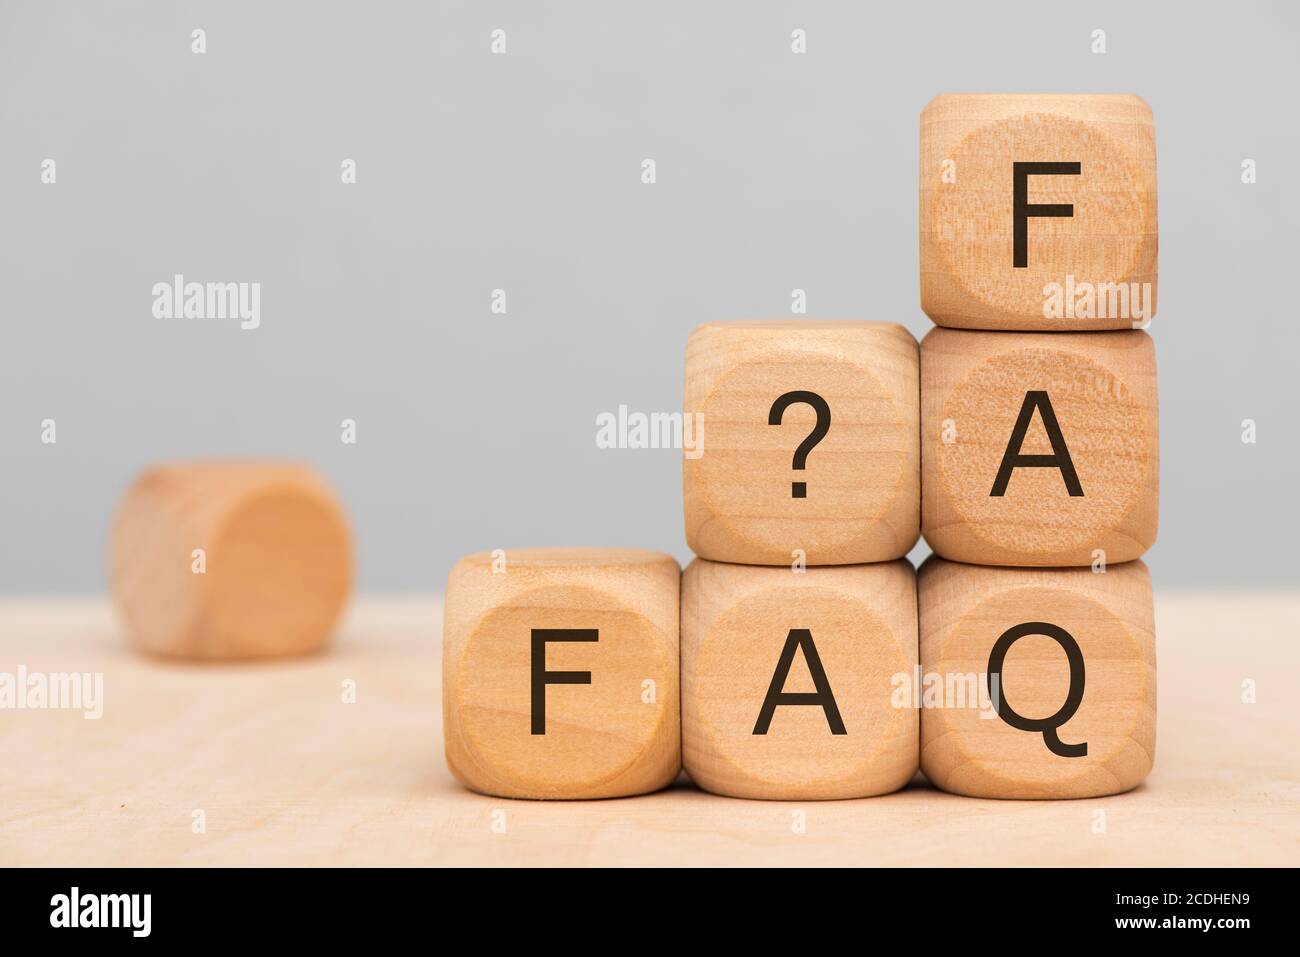 FAQ printed on wooden cubes Stock Photo